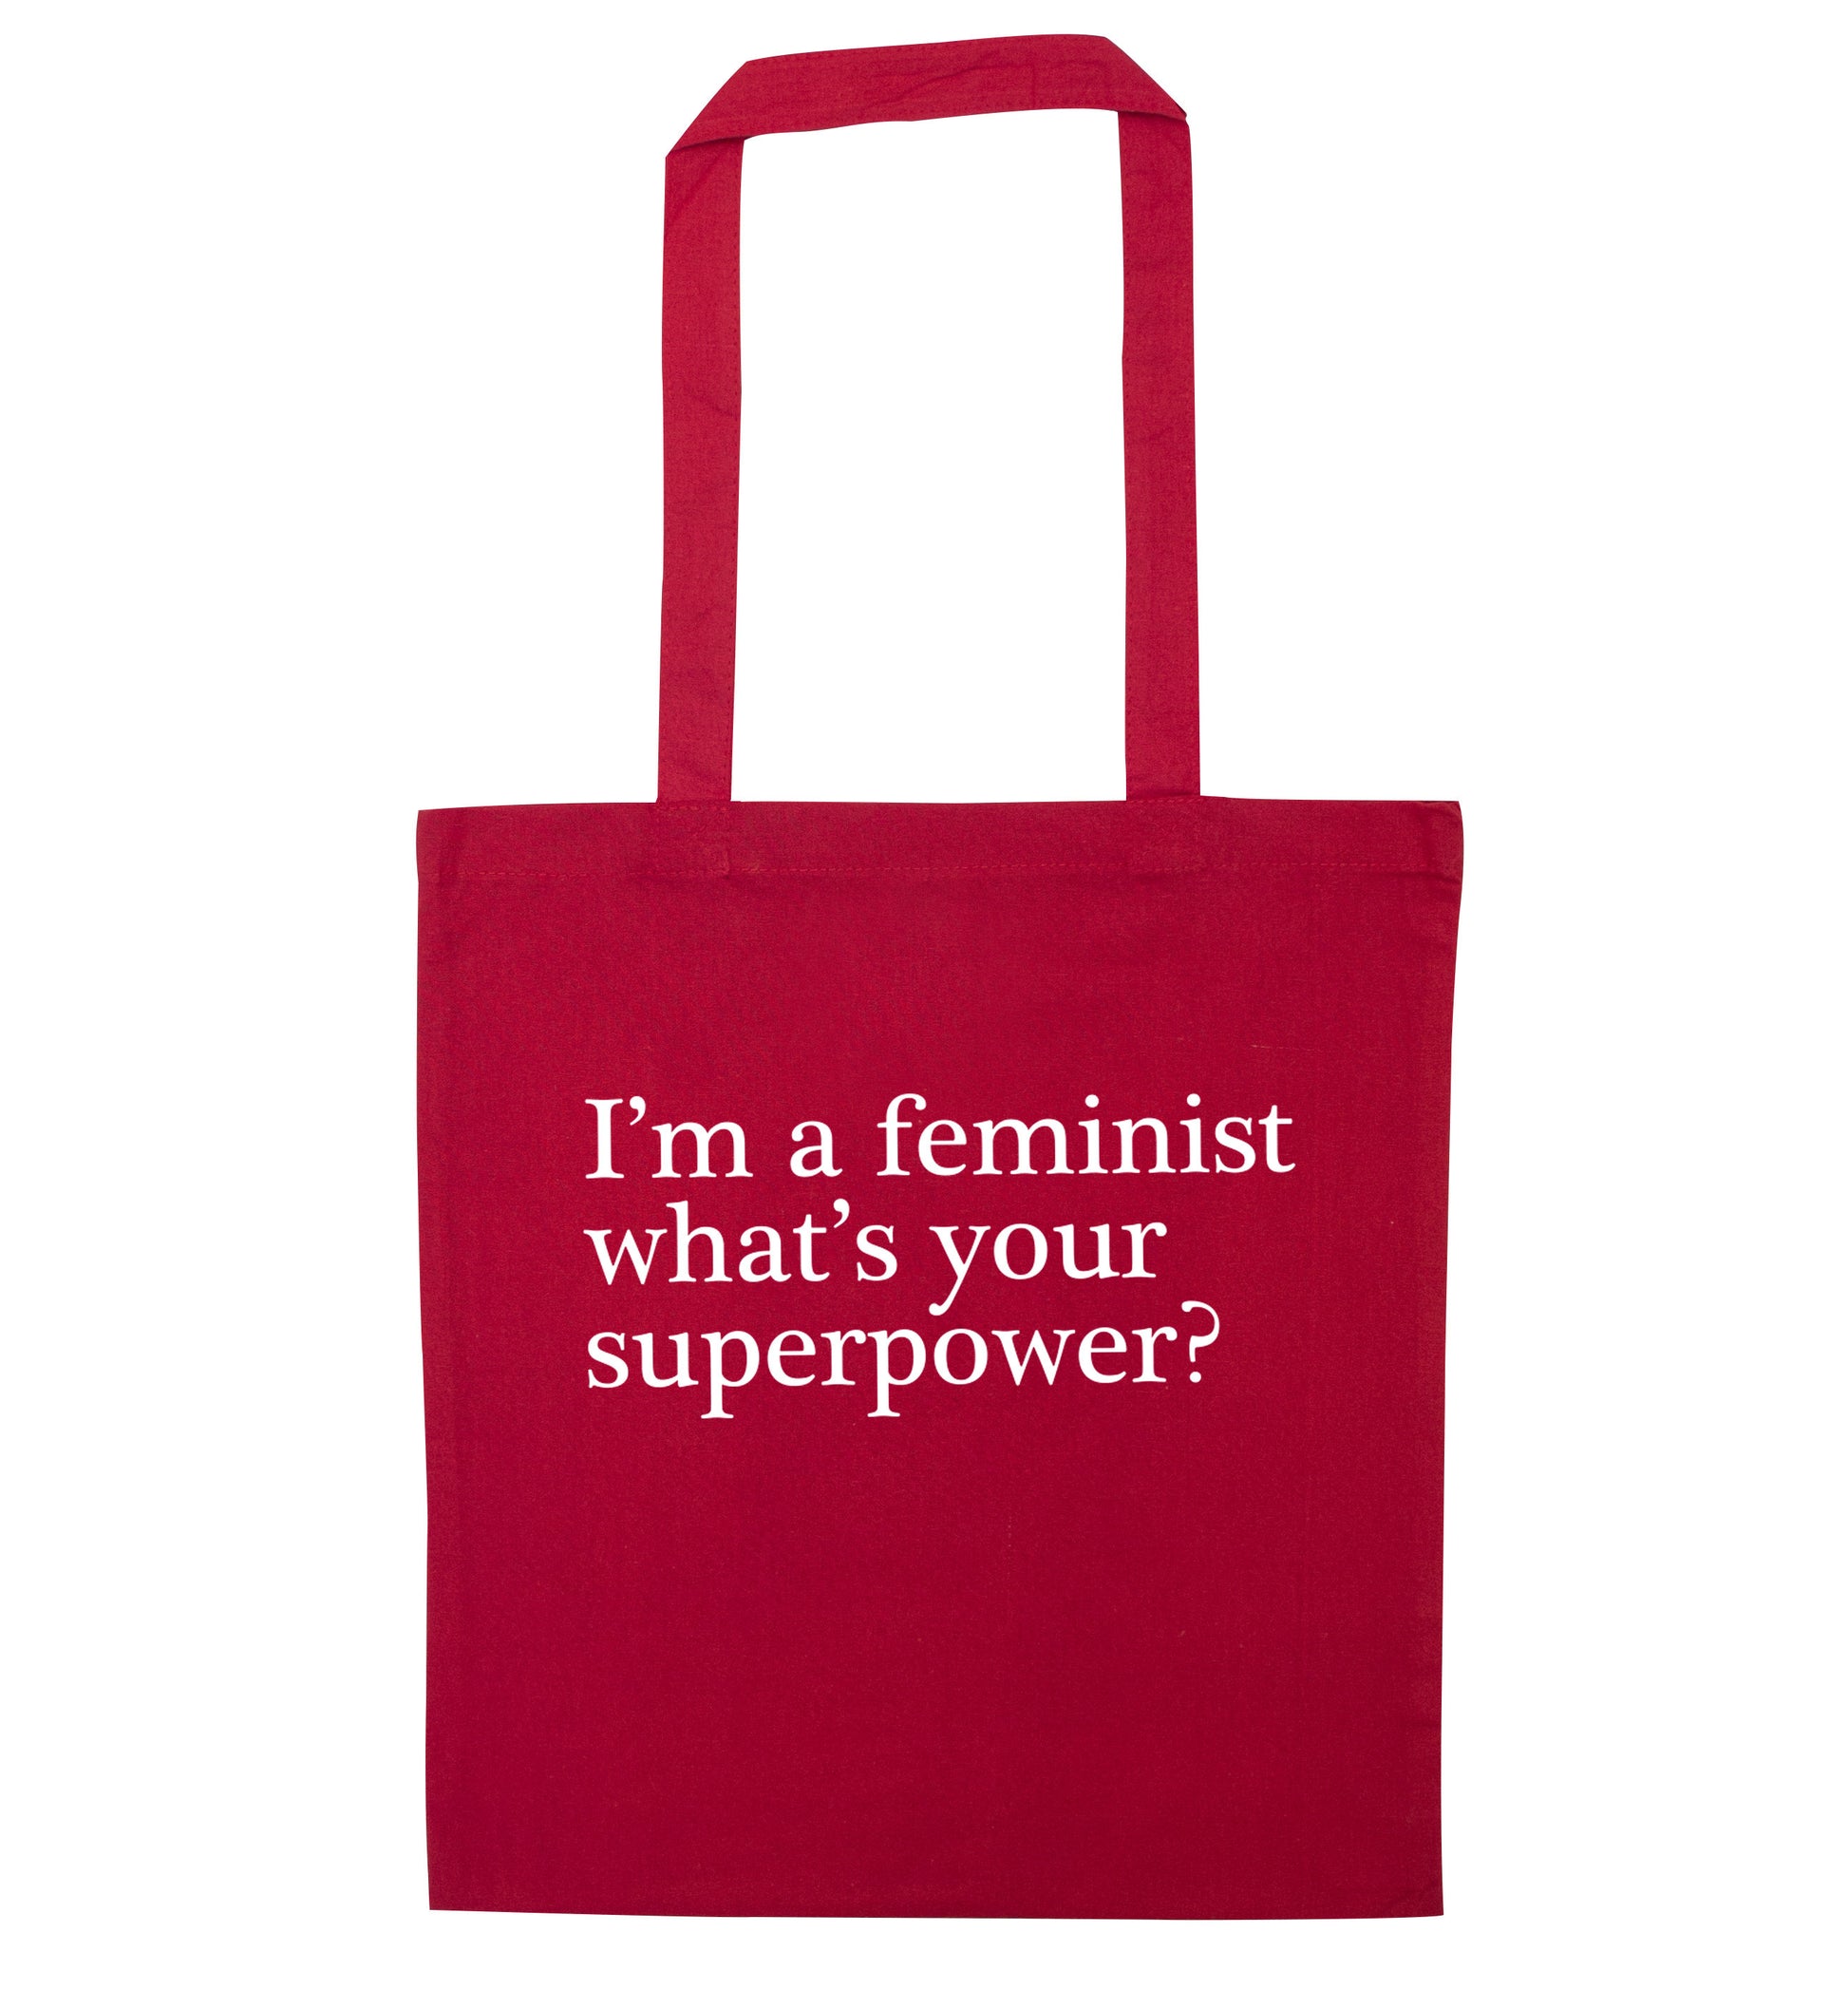 I'm a feminist what's your superpower? red tote bag